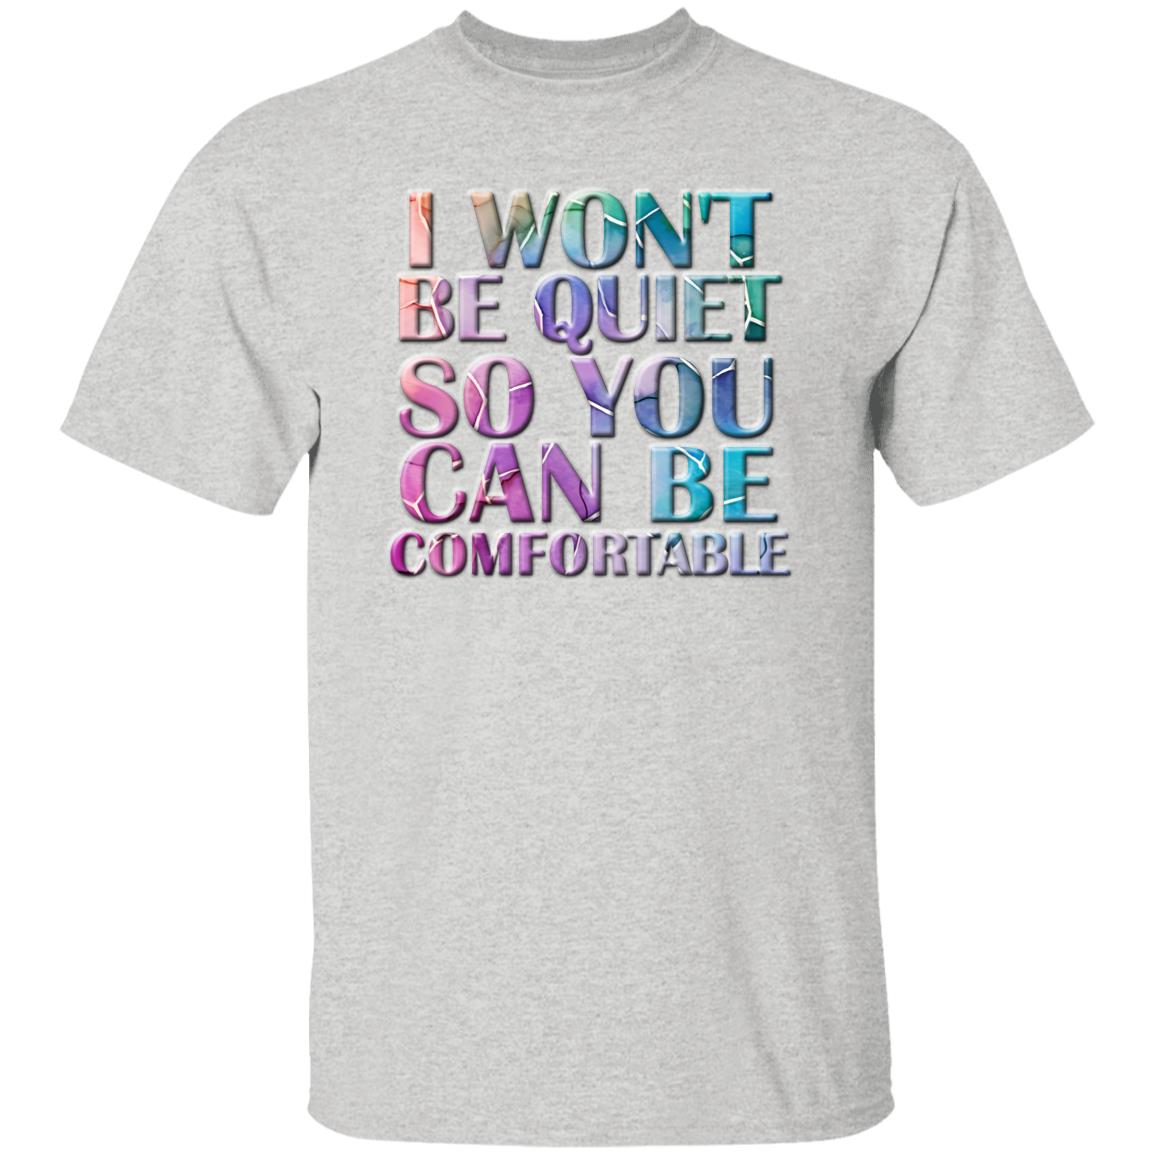 I won't be quiet so you can be comfortable T-Shirt